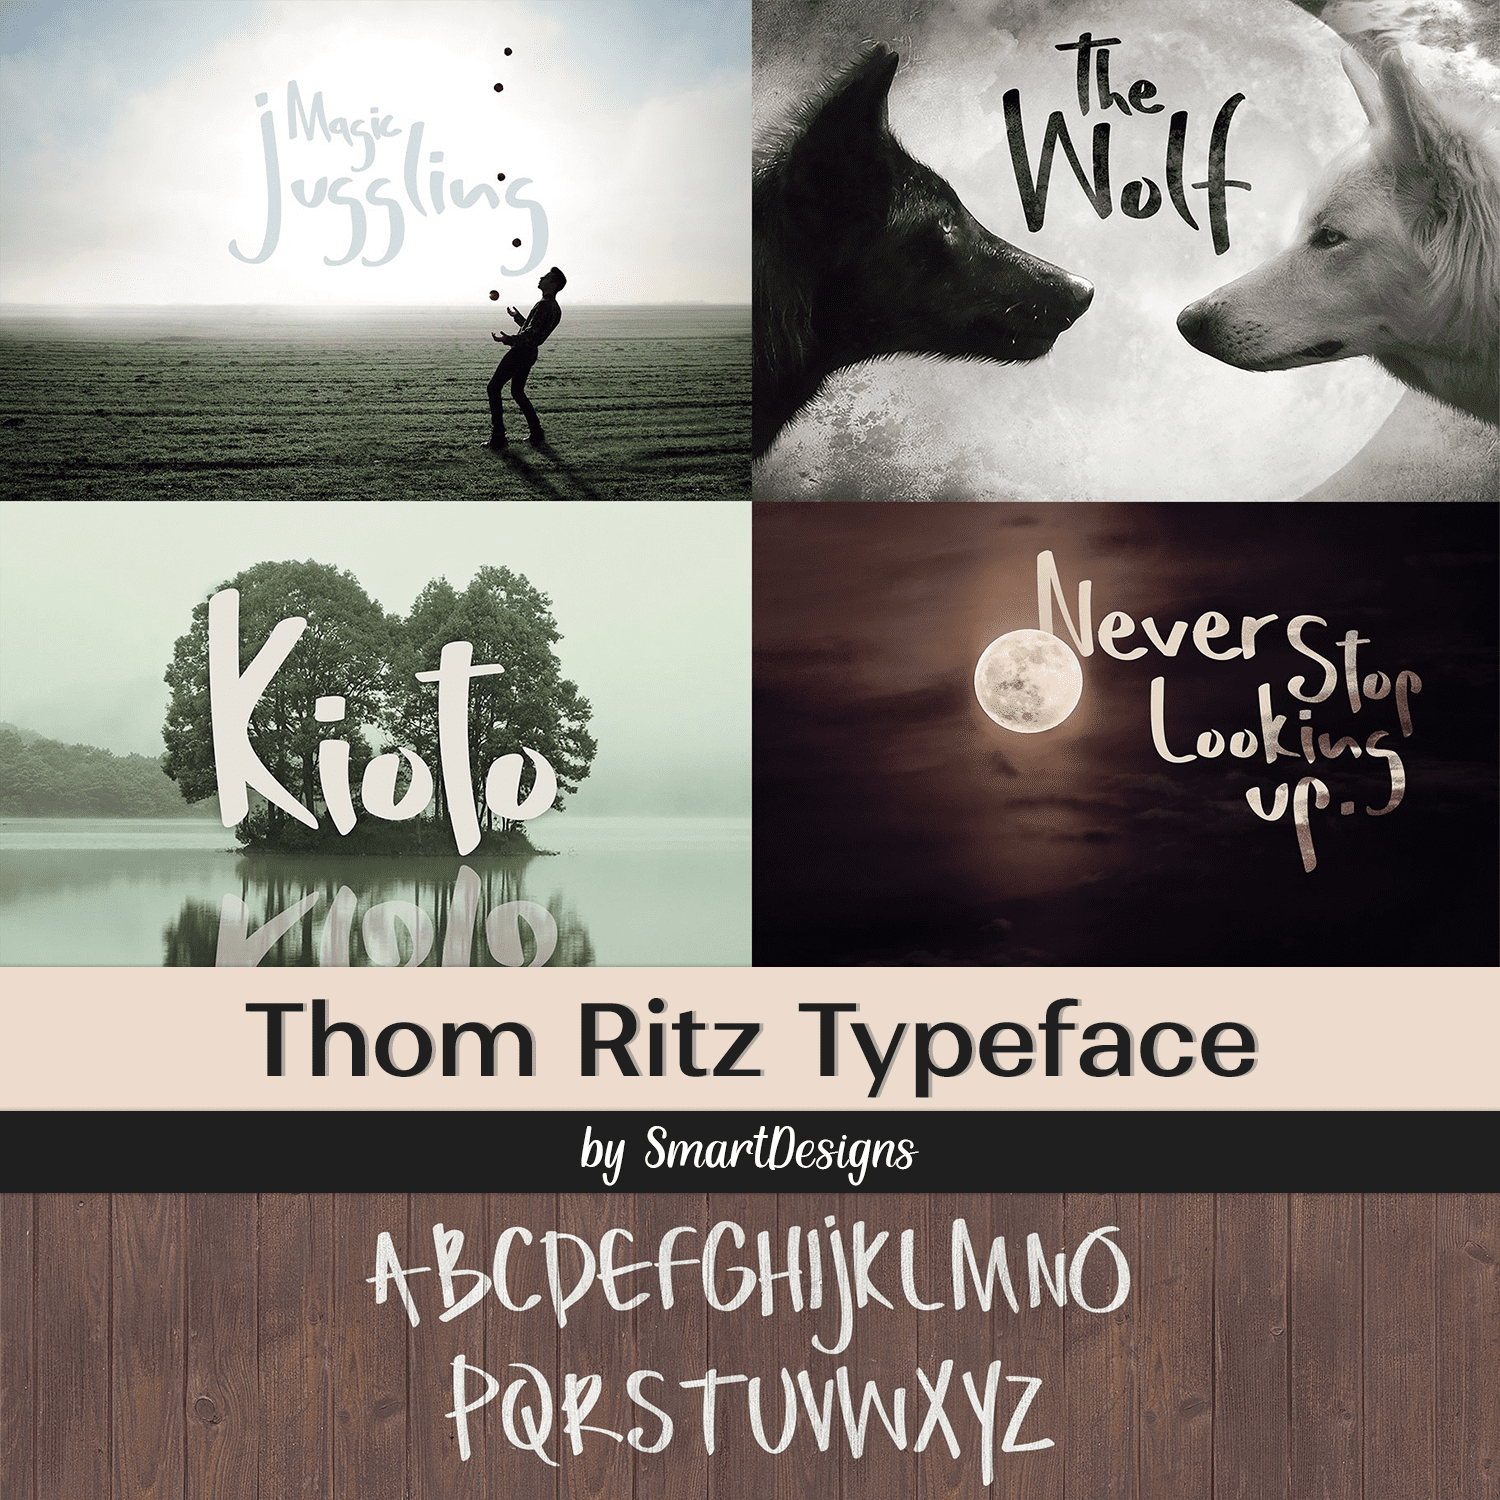 Preview thom ritz typeface.